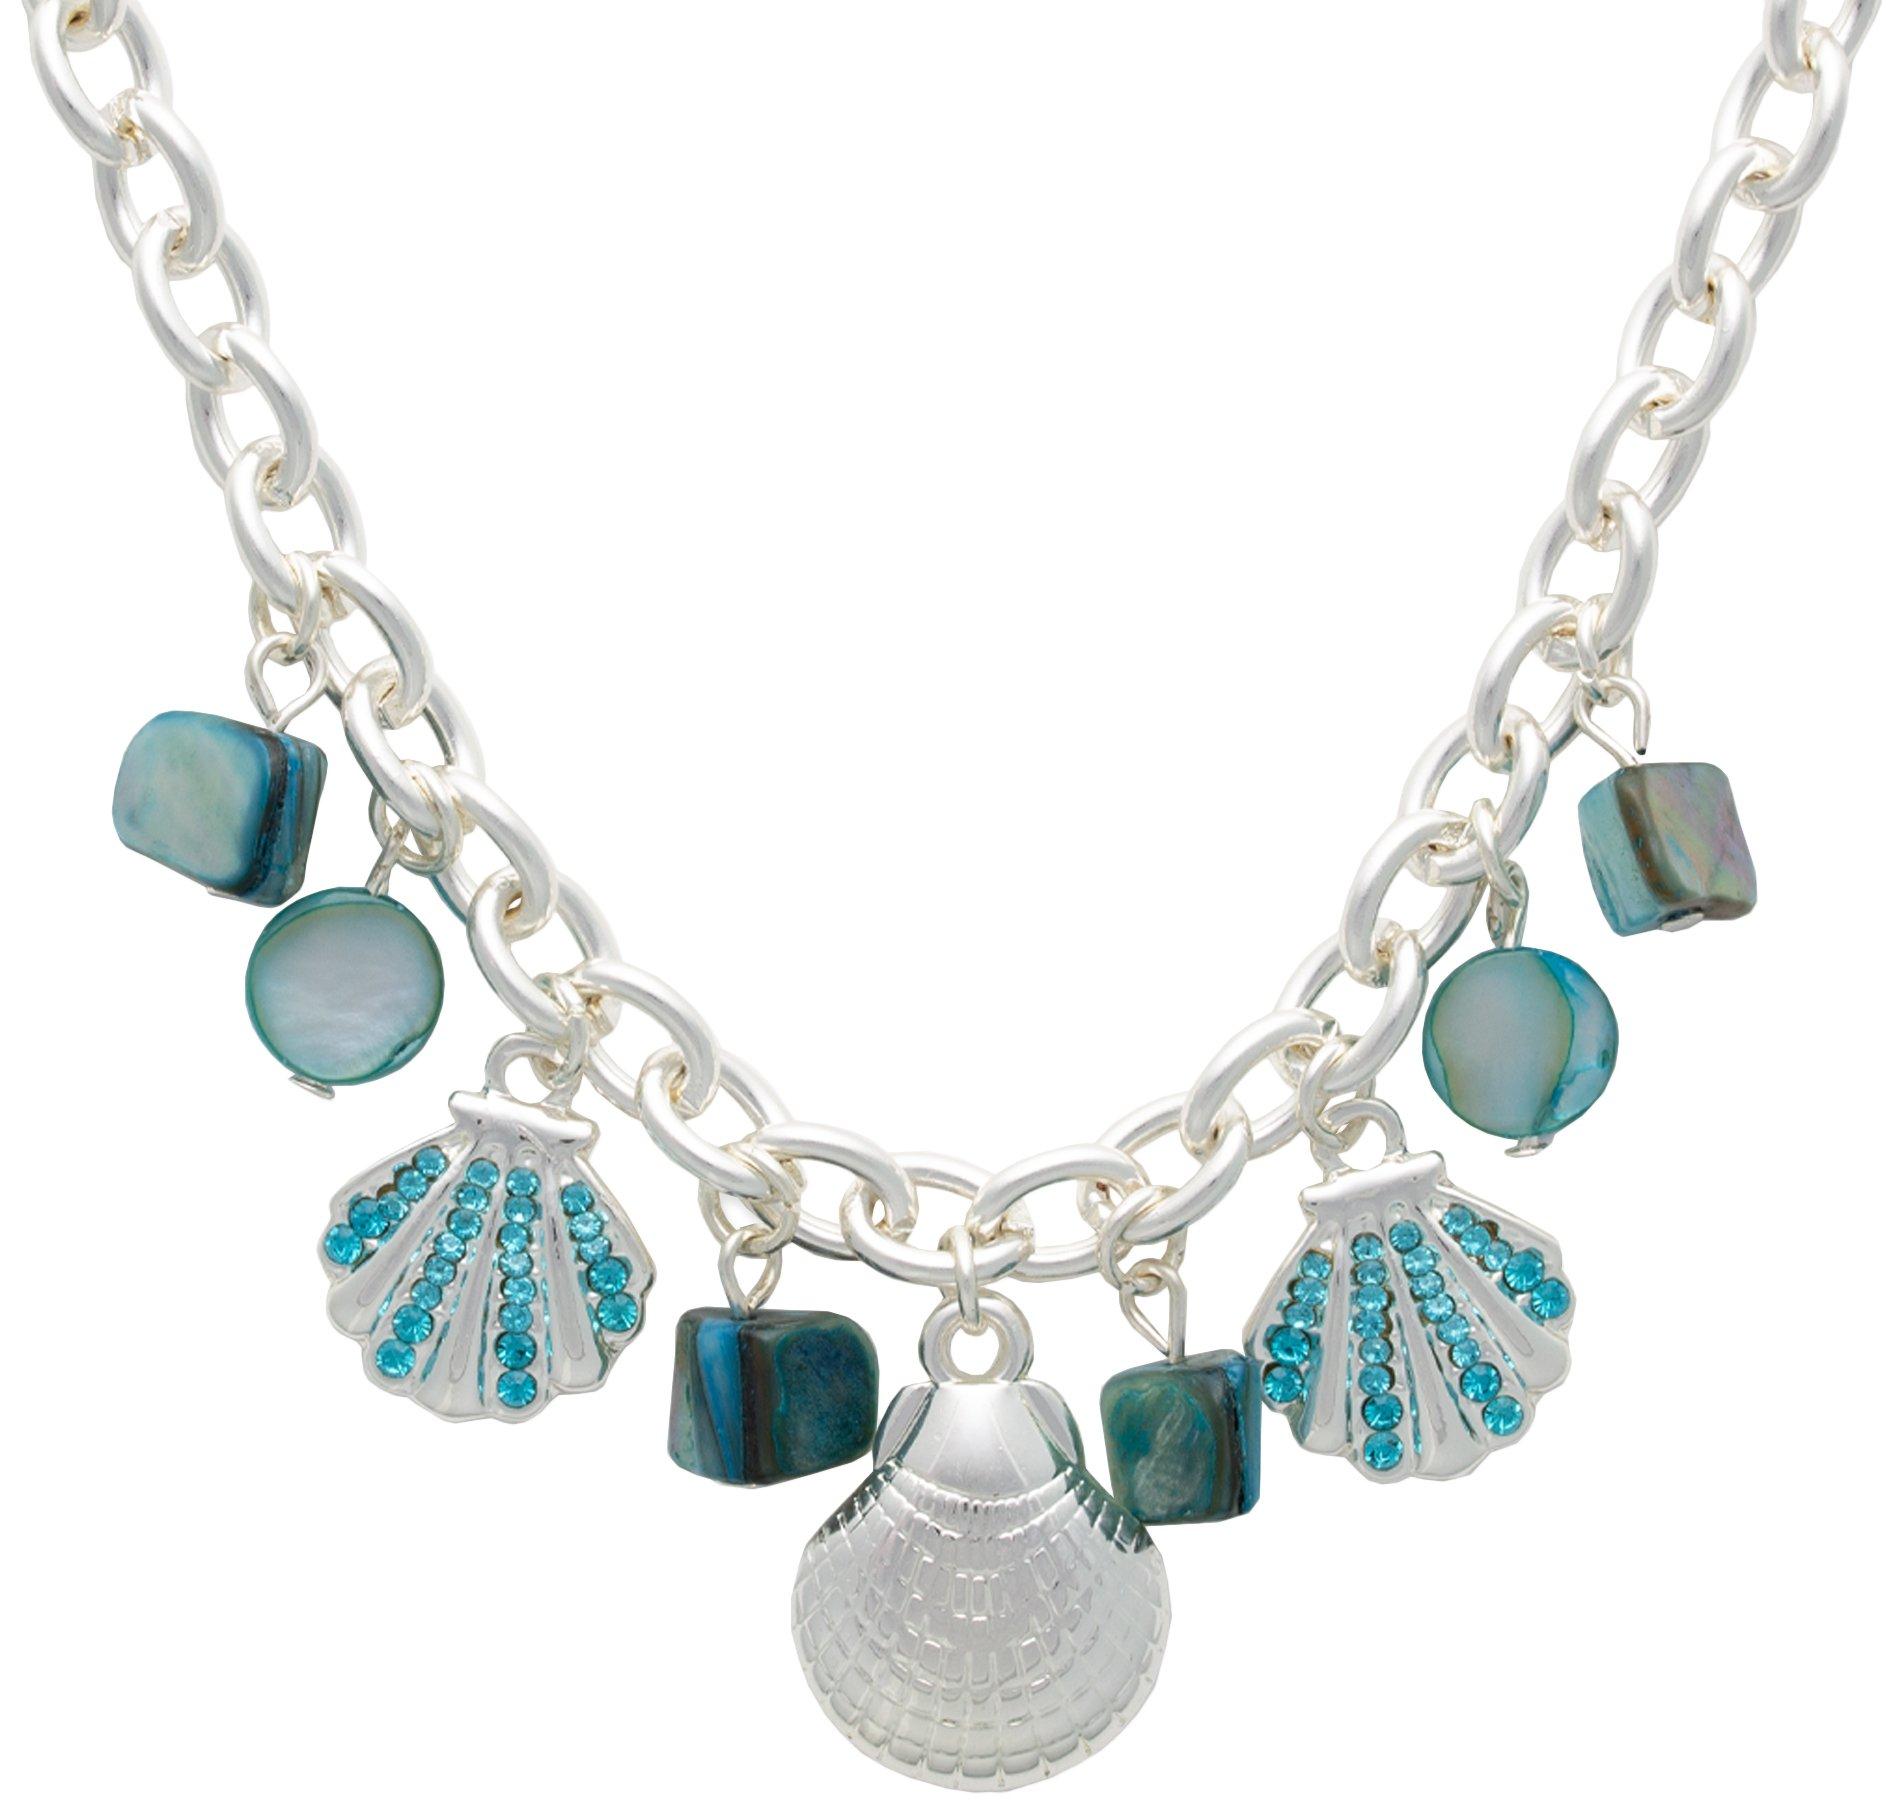 Beach Chic 18 In. Pave Shell & Chip Bead Frontal Necklace